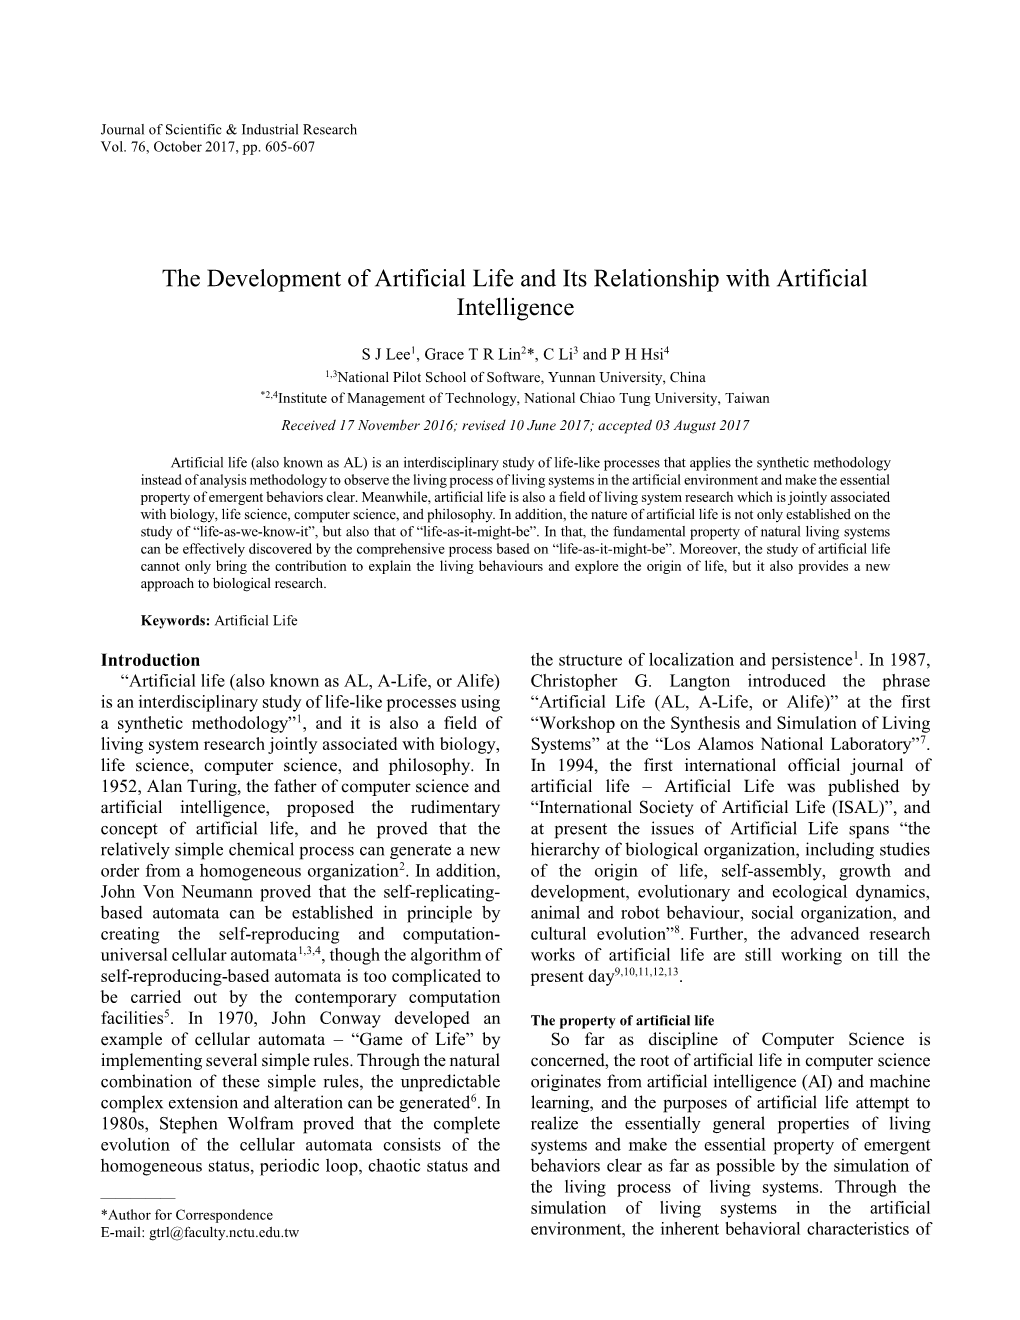 The Development of Artificial Life and Its Relationship with Artificial Intelligence